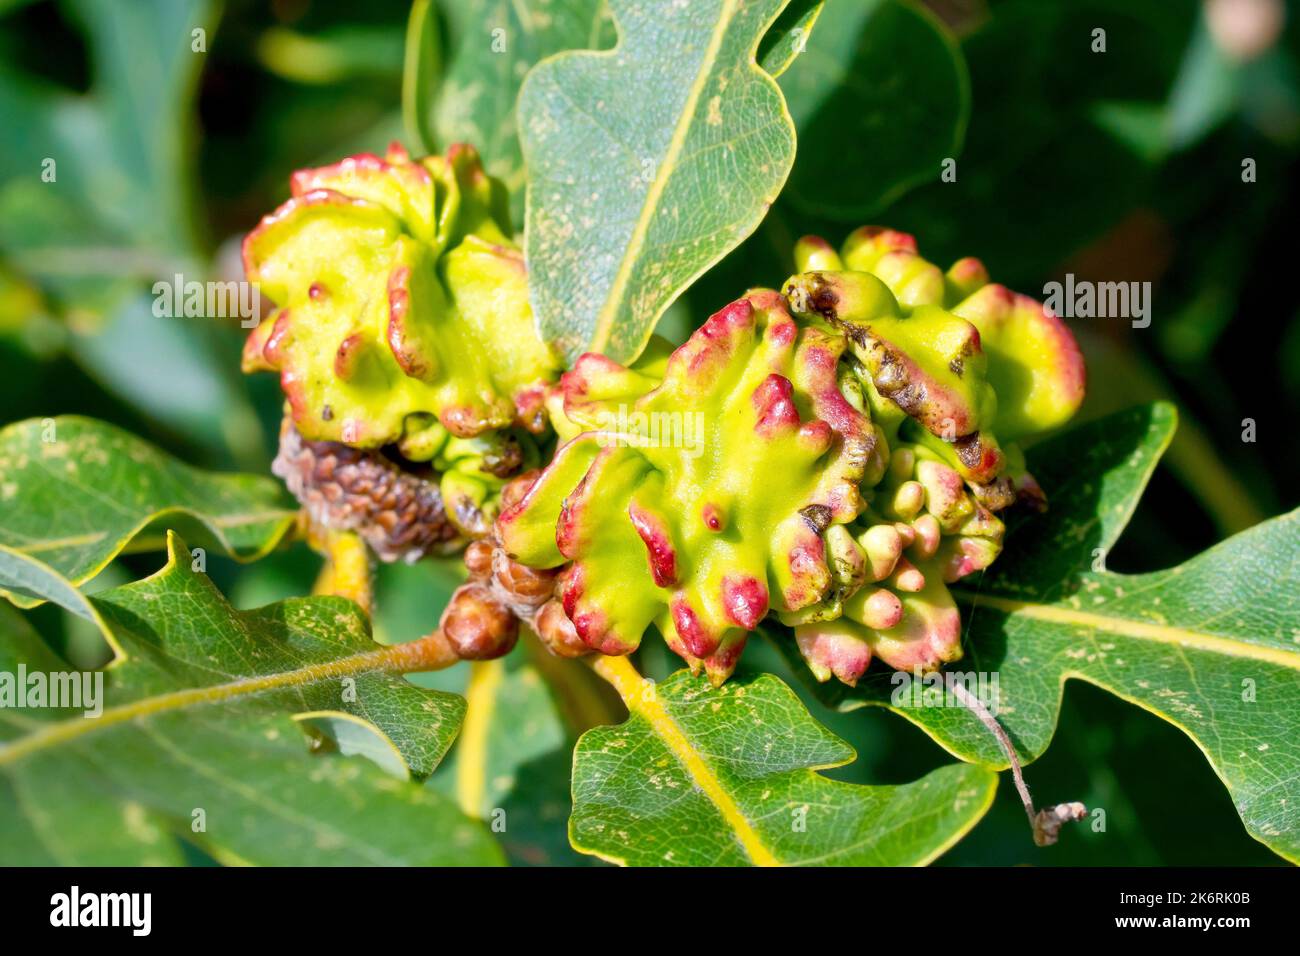 English or Pedunculate Oak (quercus robur), close up of acorns deformed by the Knopper Oak Gall Wasp (andricus quercuscalicis). Stock Photo